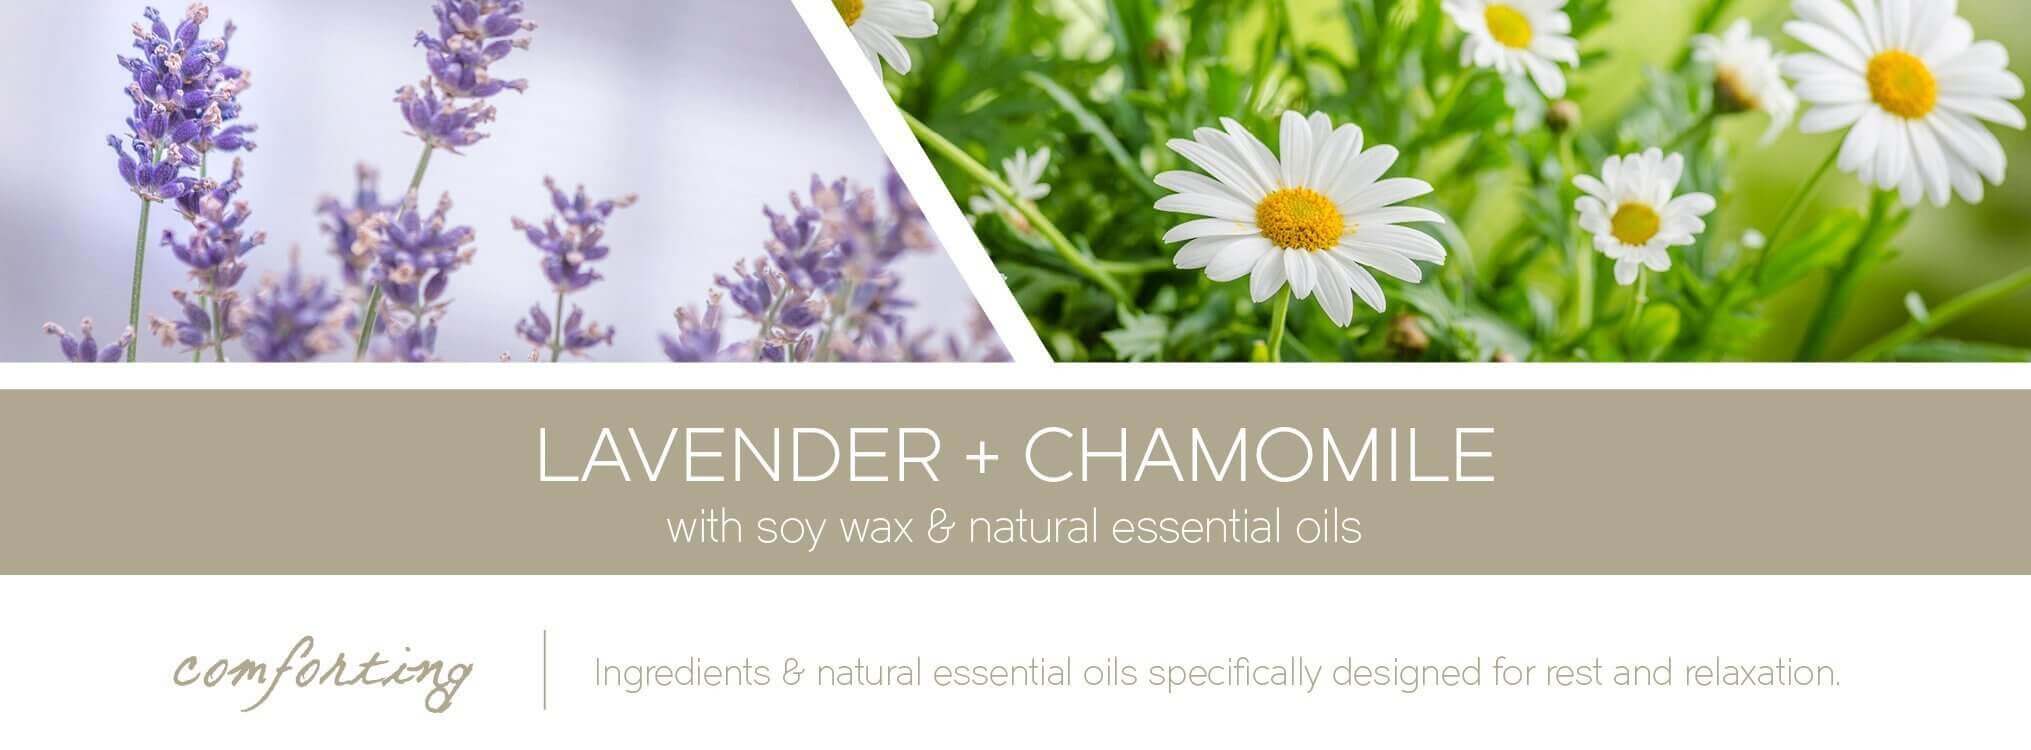 lavender-chamomile-aromatherapy-candle-fragrancexE3T5H5OMd2xC